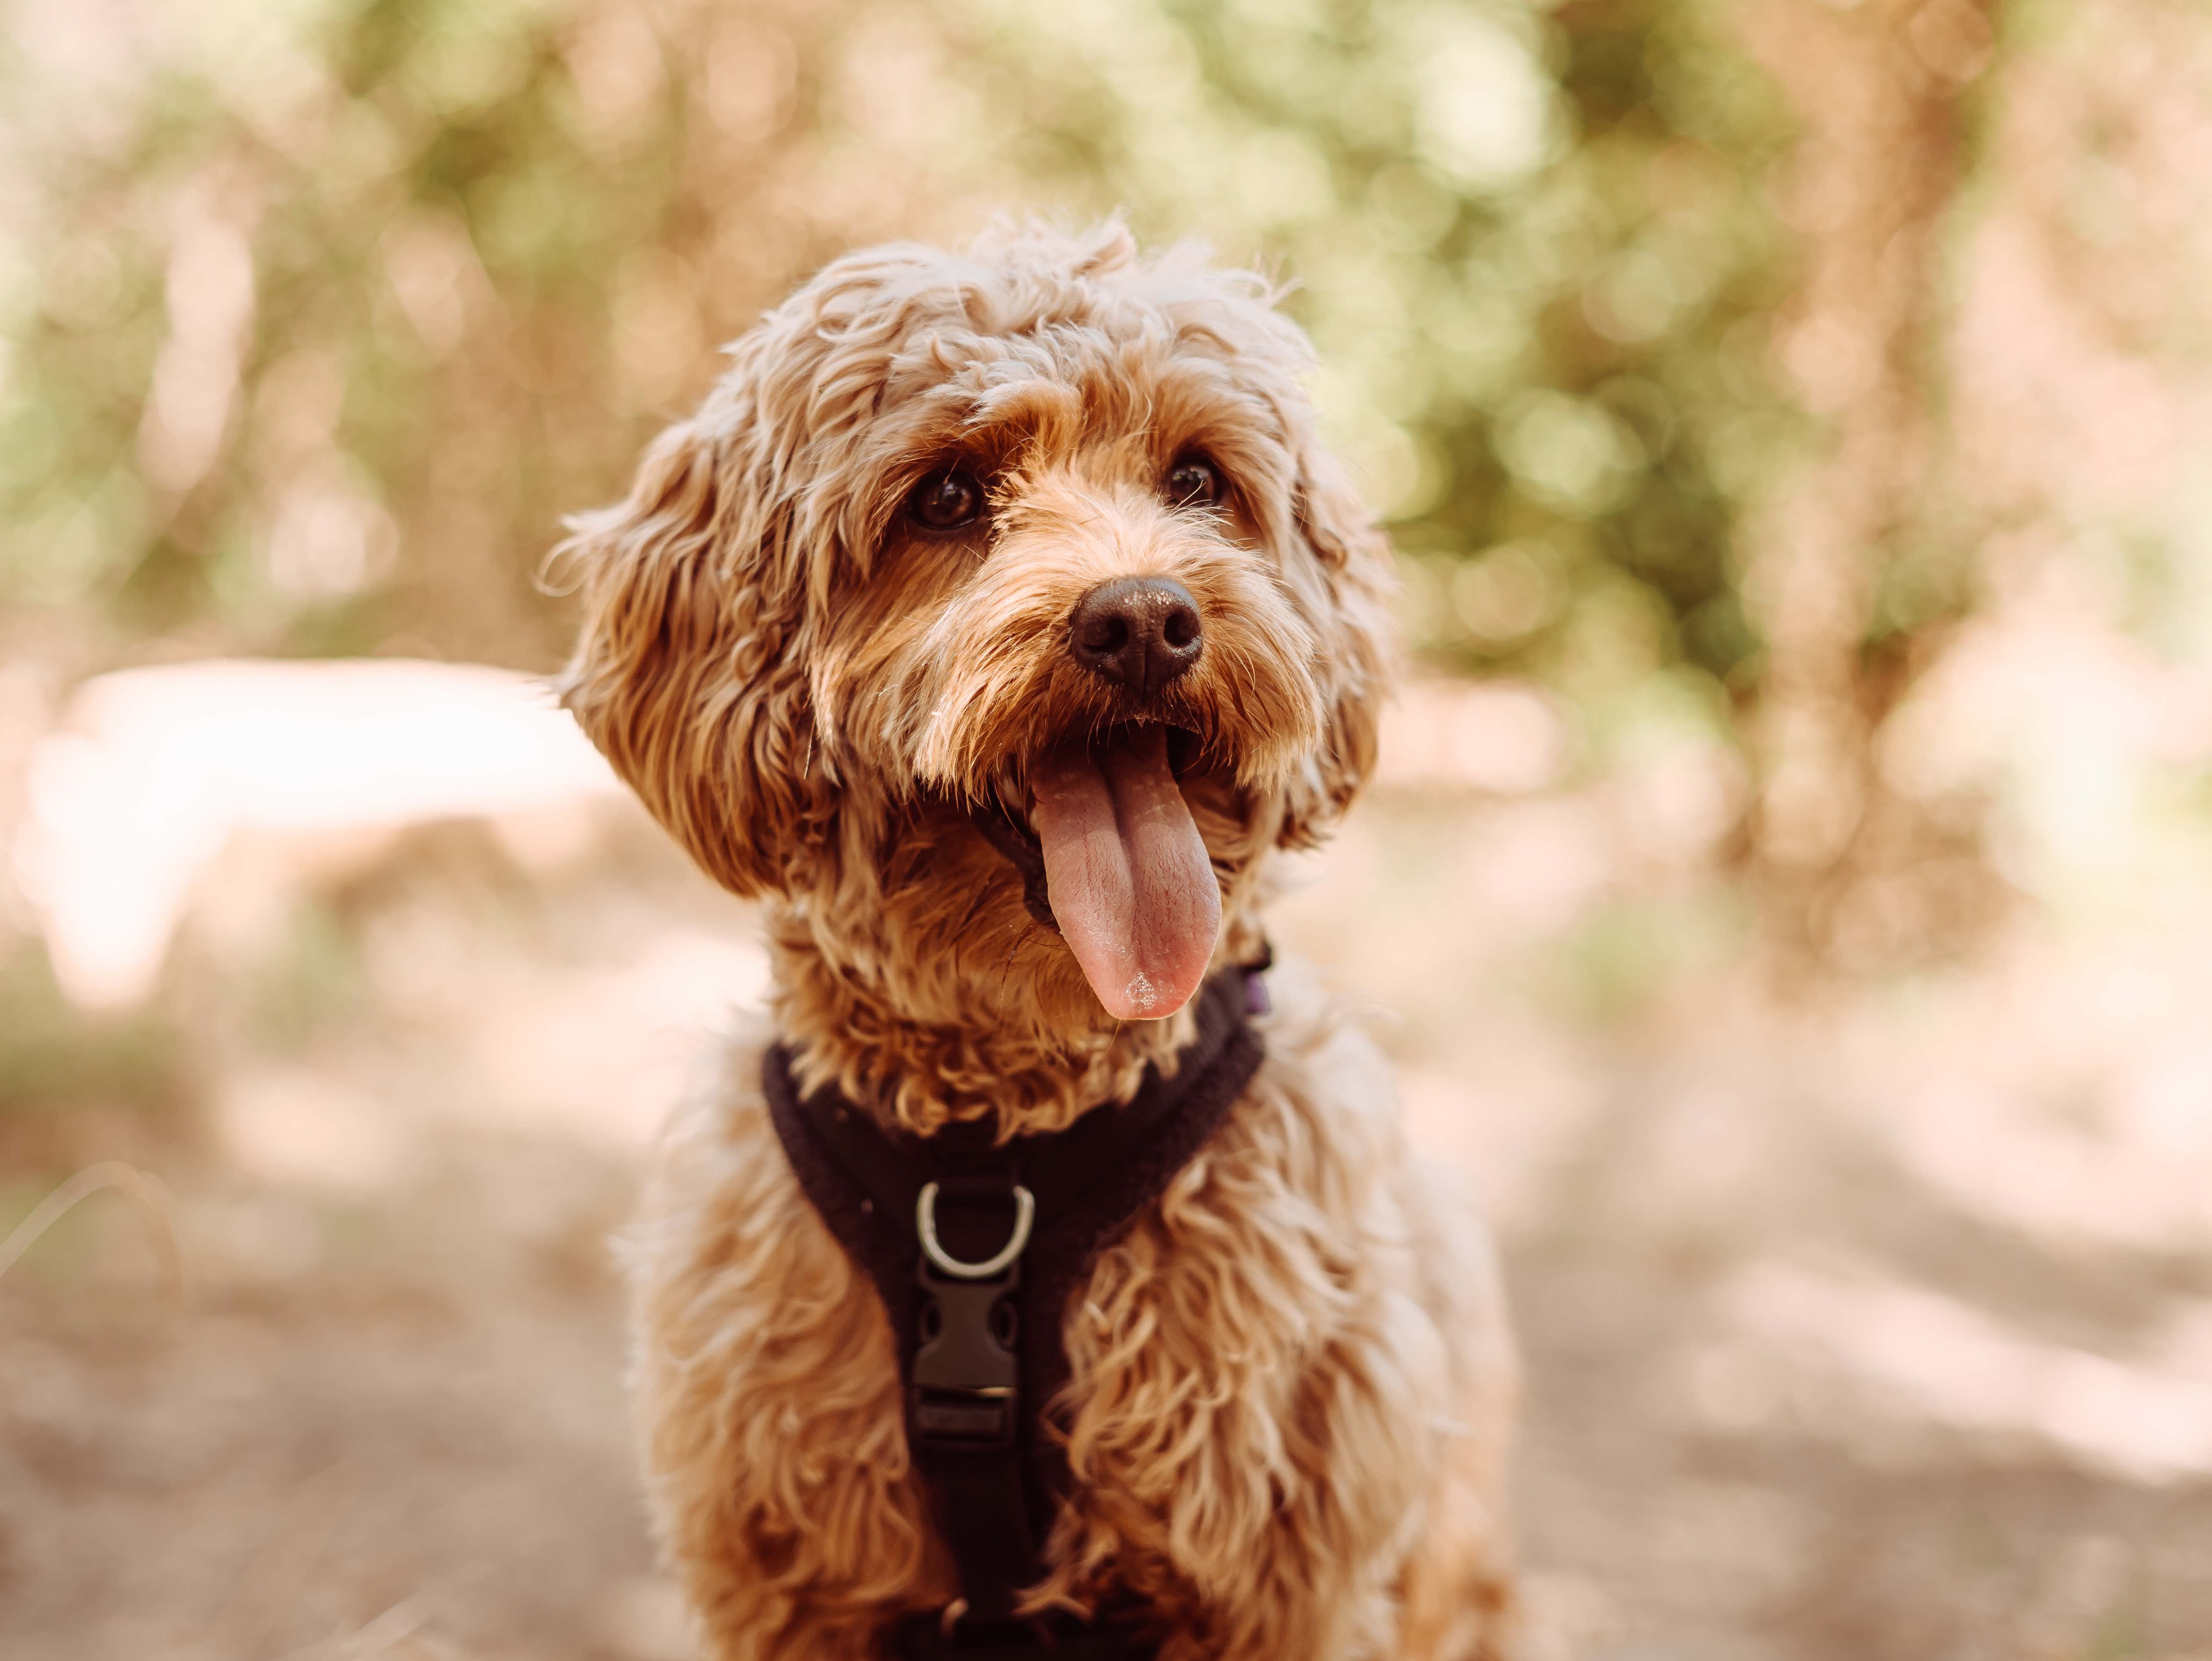 brown cavapoo dog wearing a harness with his tongue out